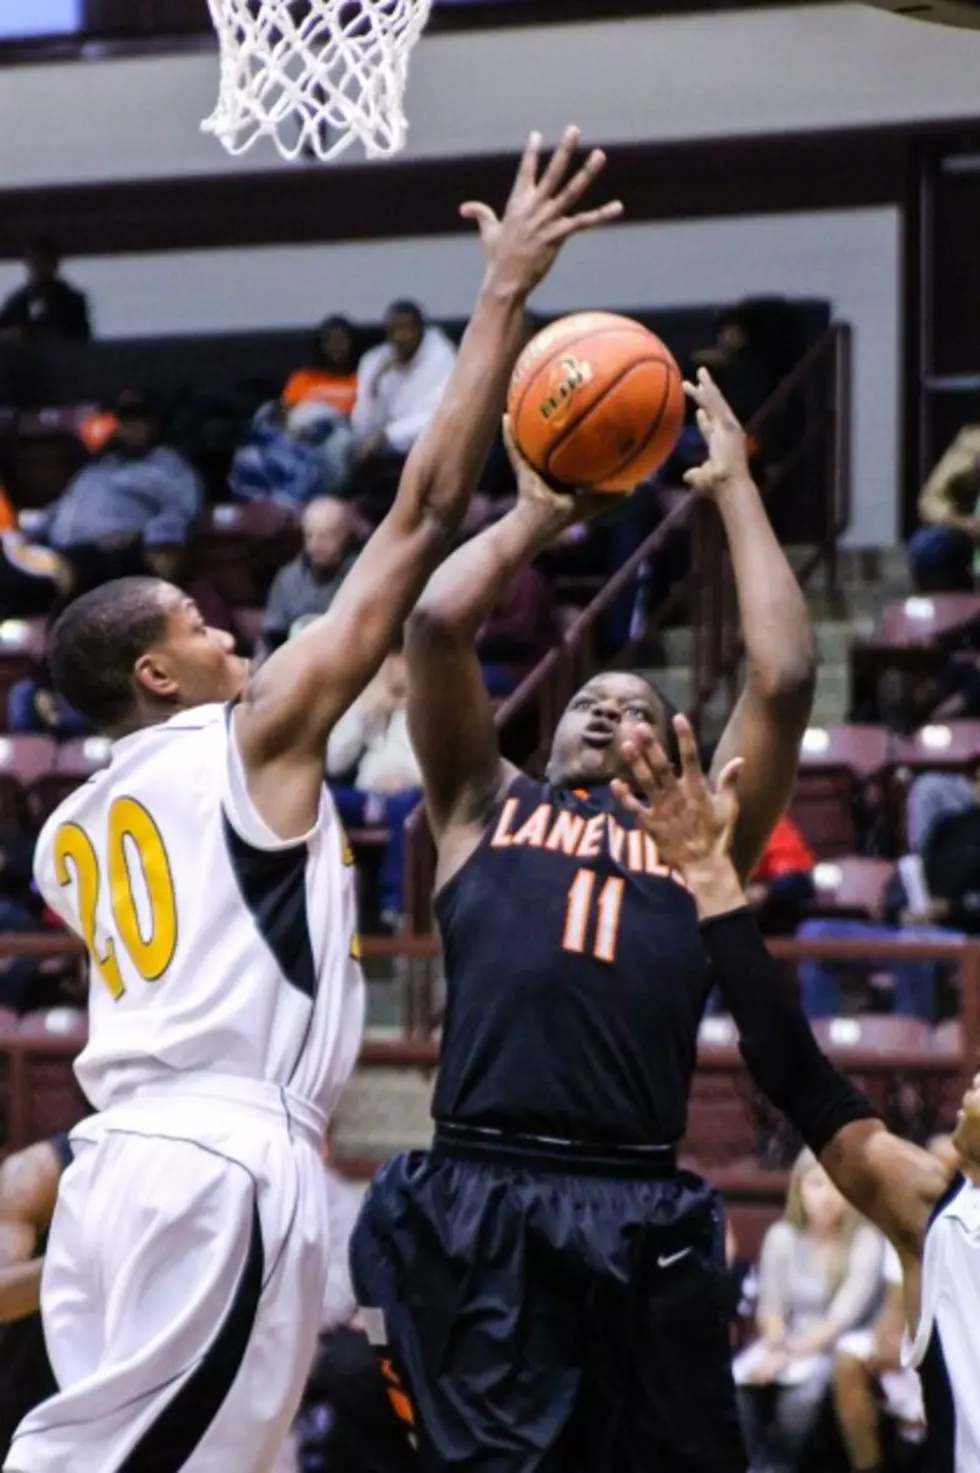 State-Ranked Laneville Pulls Away from Broaddus in a Tenaha Holiday Hoops Scholarship Classic Game at Panola College